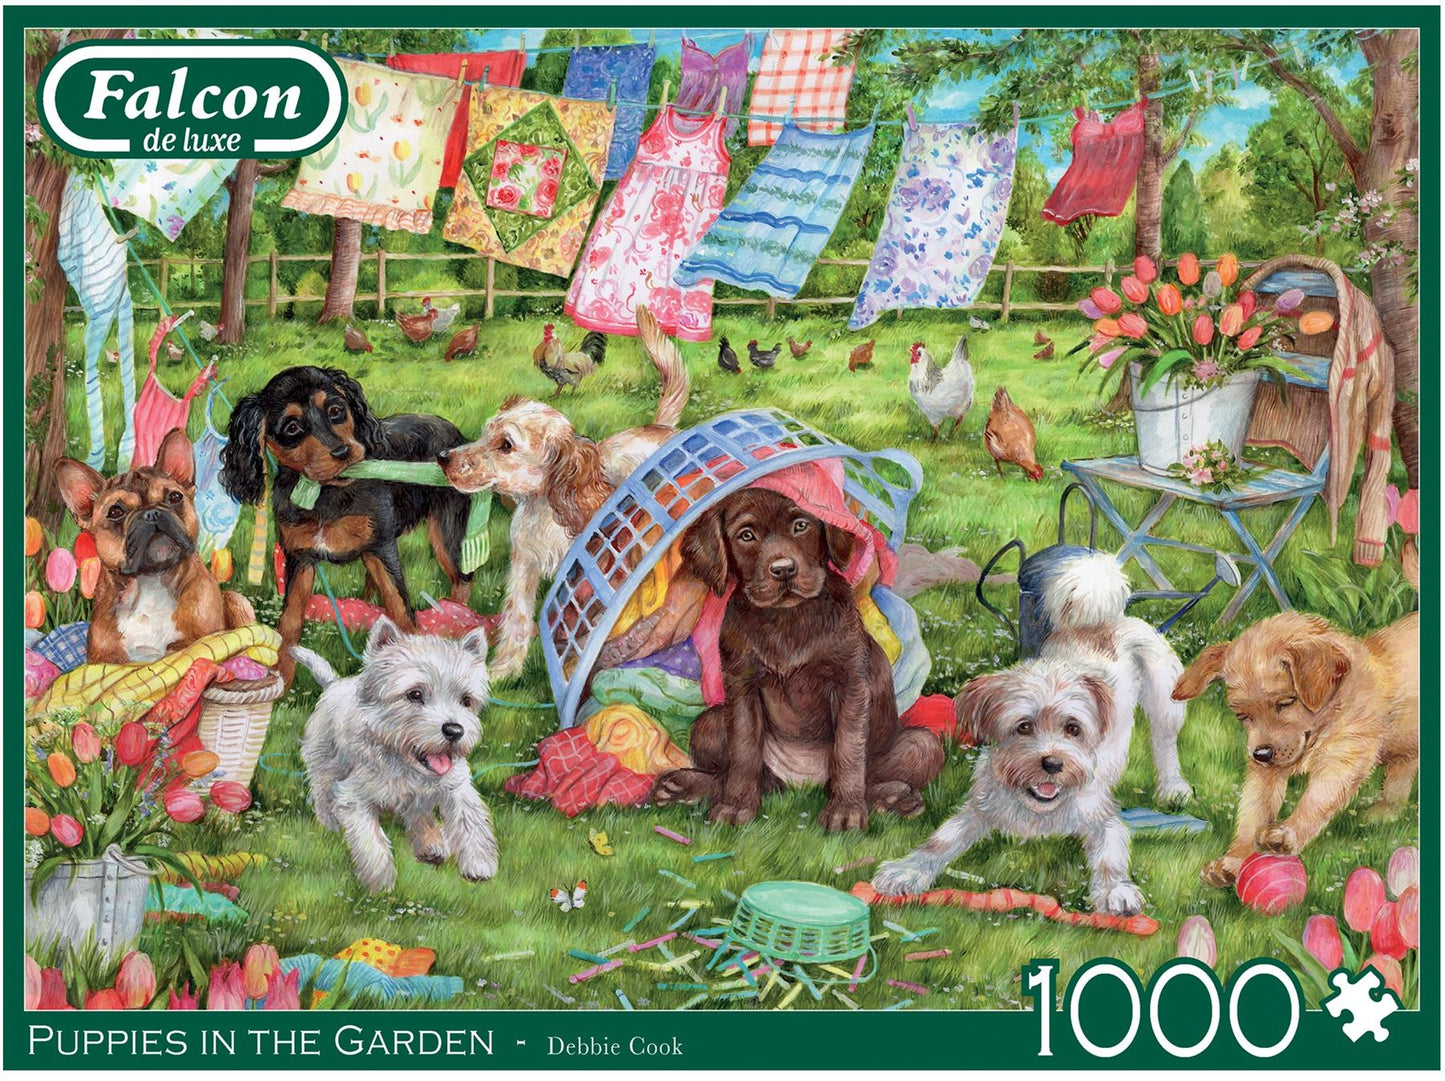 Puppies in the Garden 1000 Piece Jigsaw Puzzle box